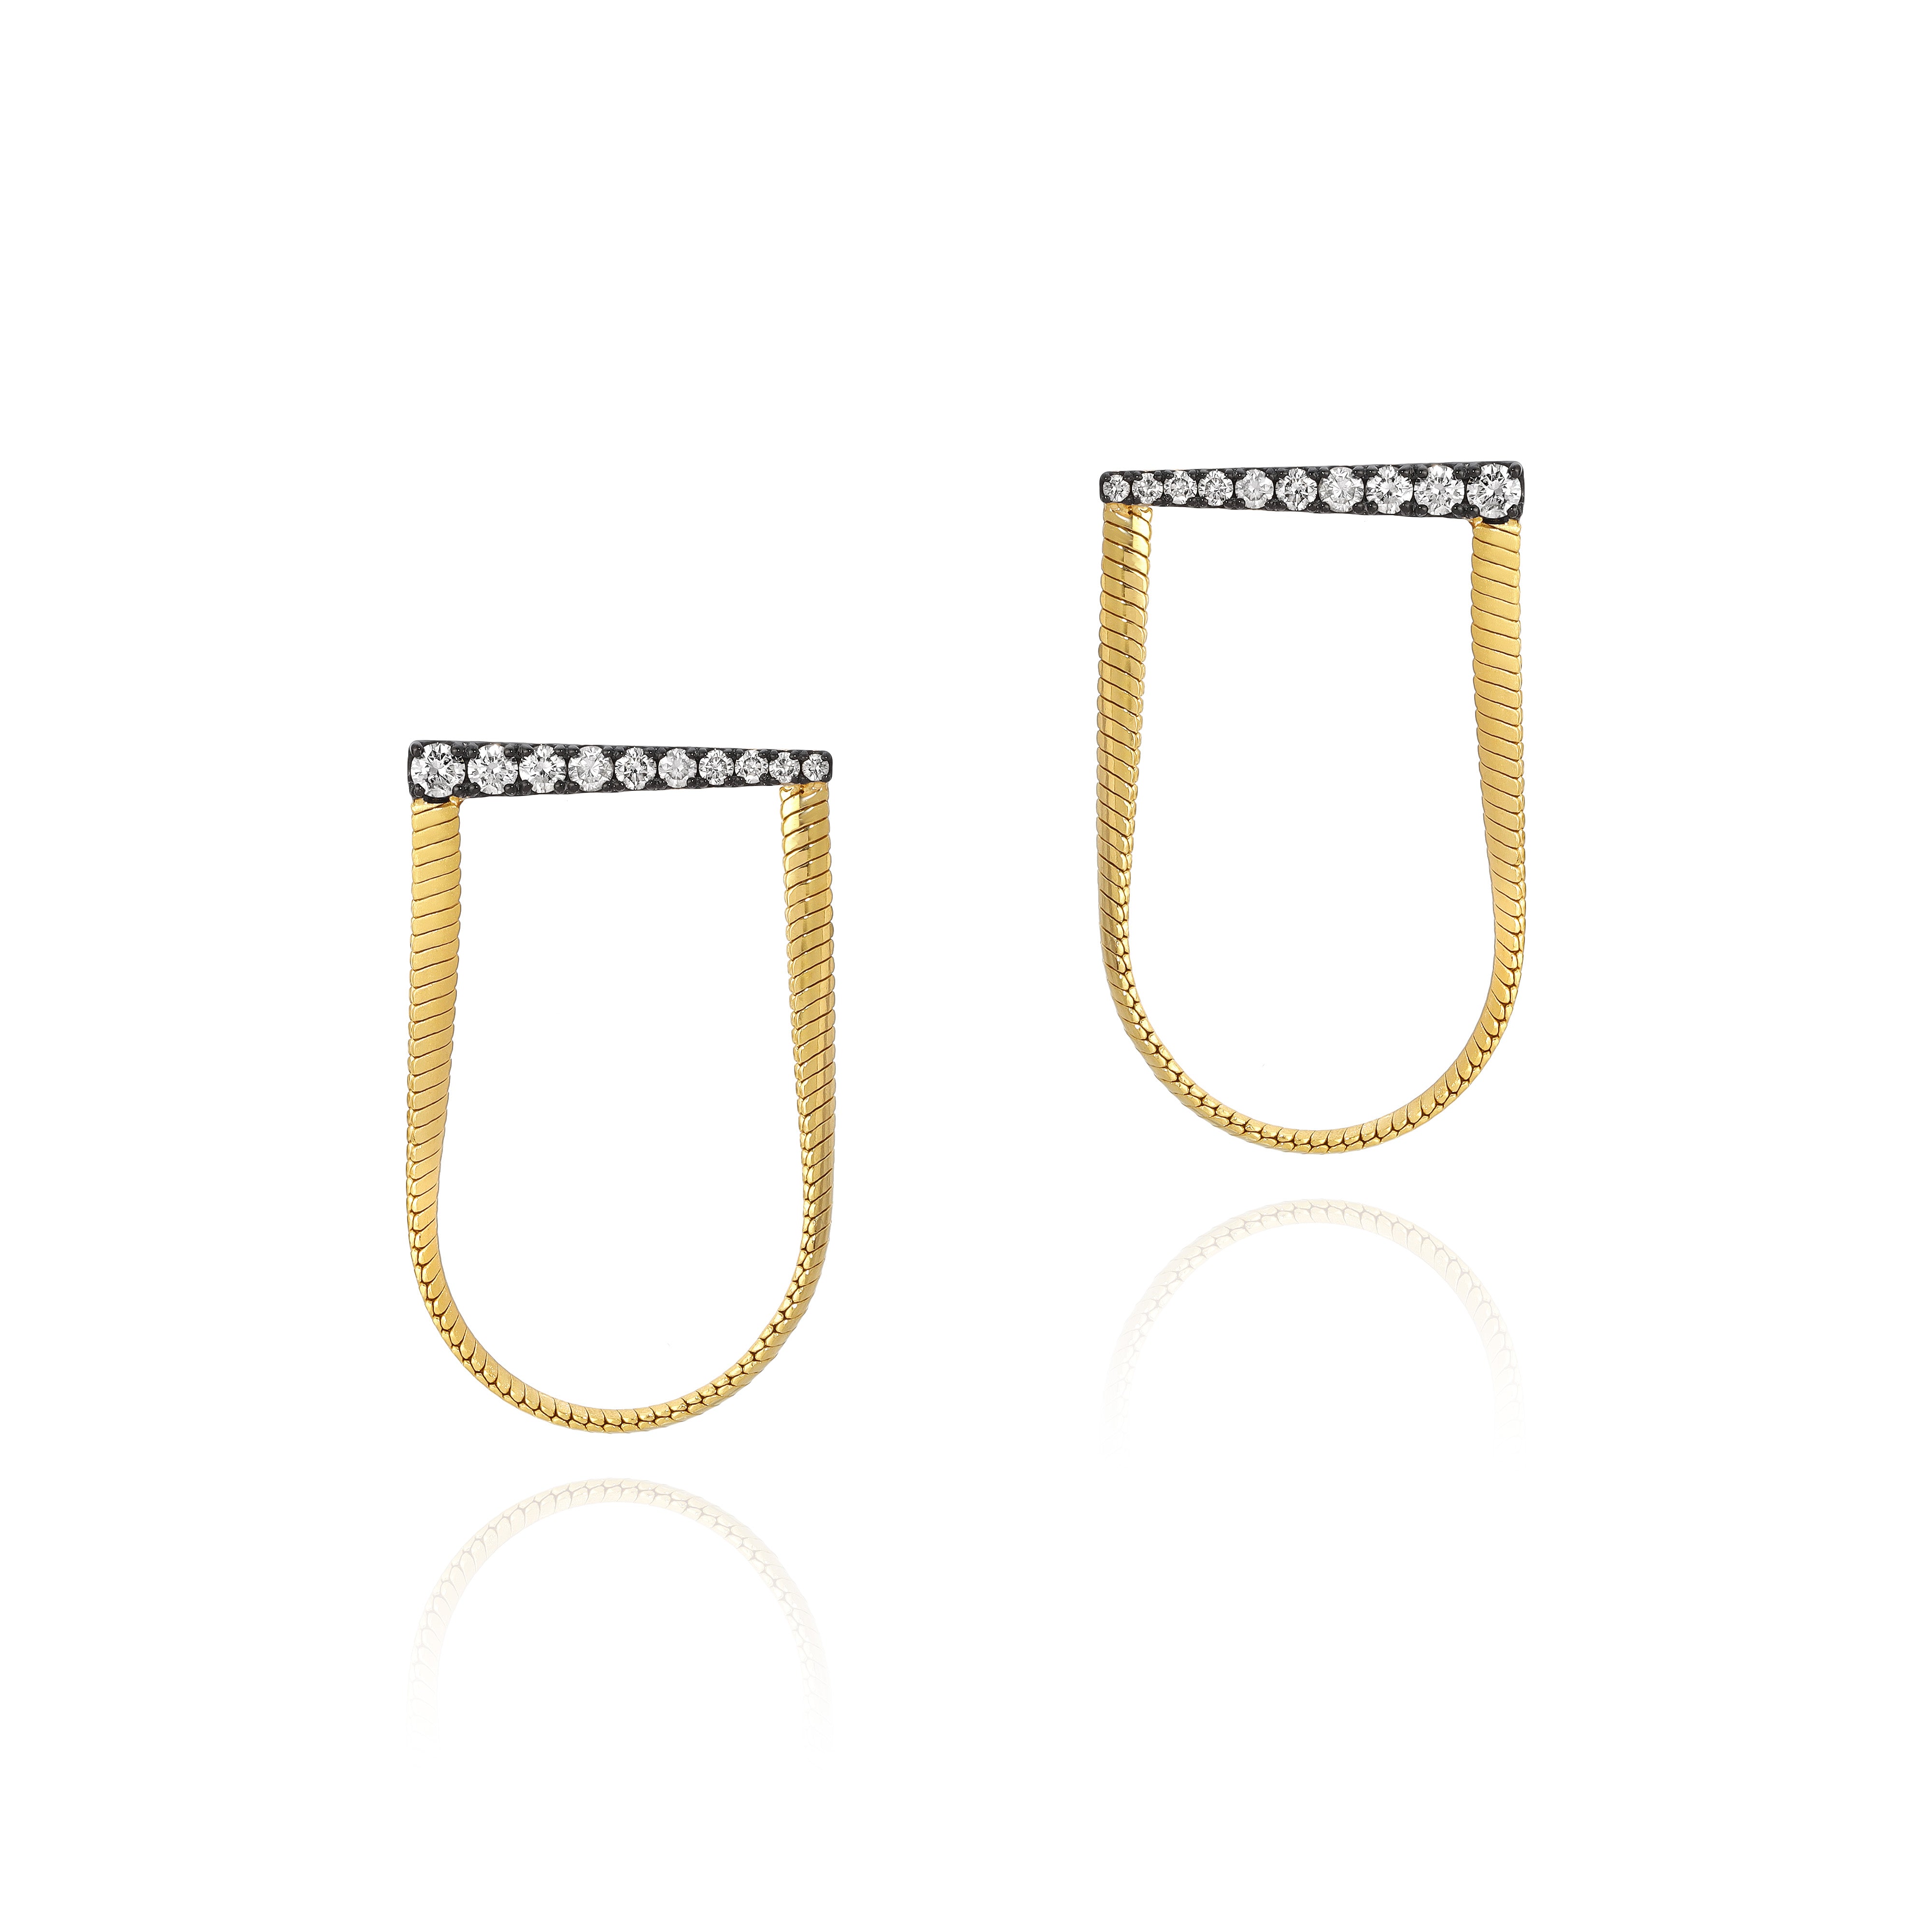 Earrings with Yellow Gold snake chain draped from Rhodium Plated rod of Diamonds, Large